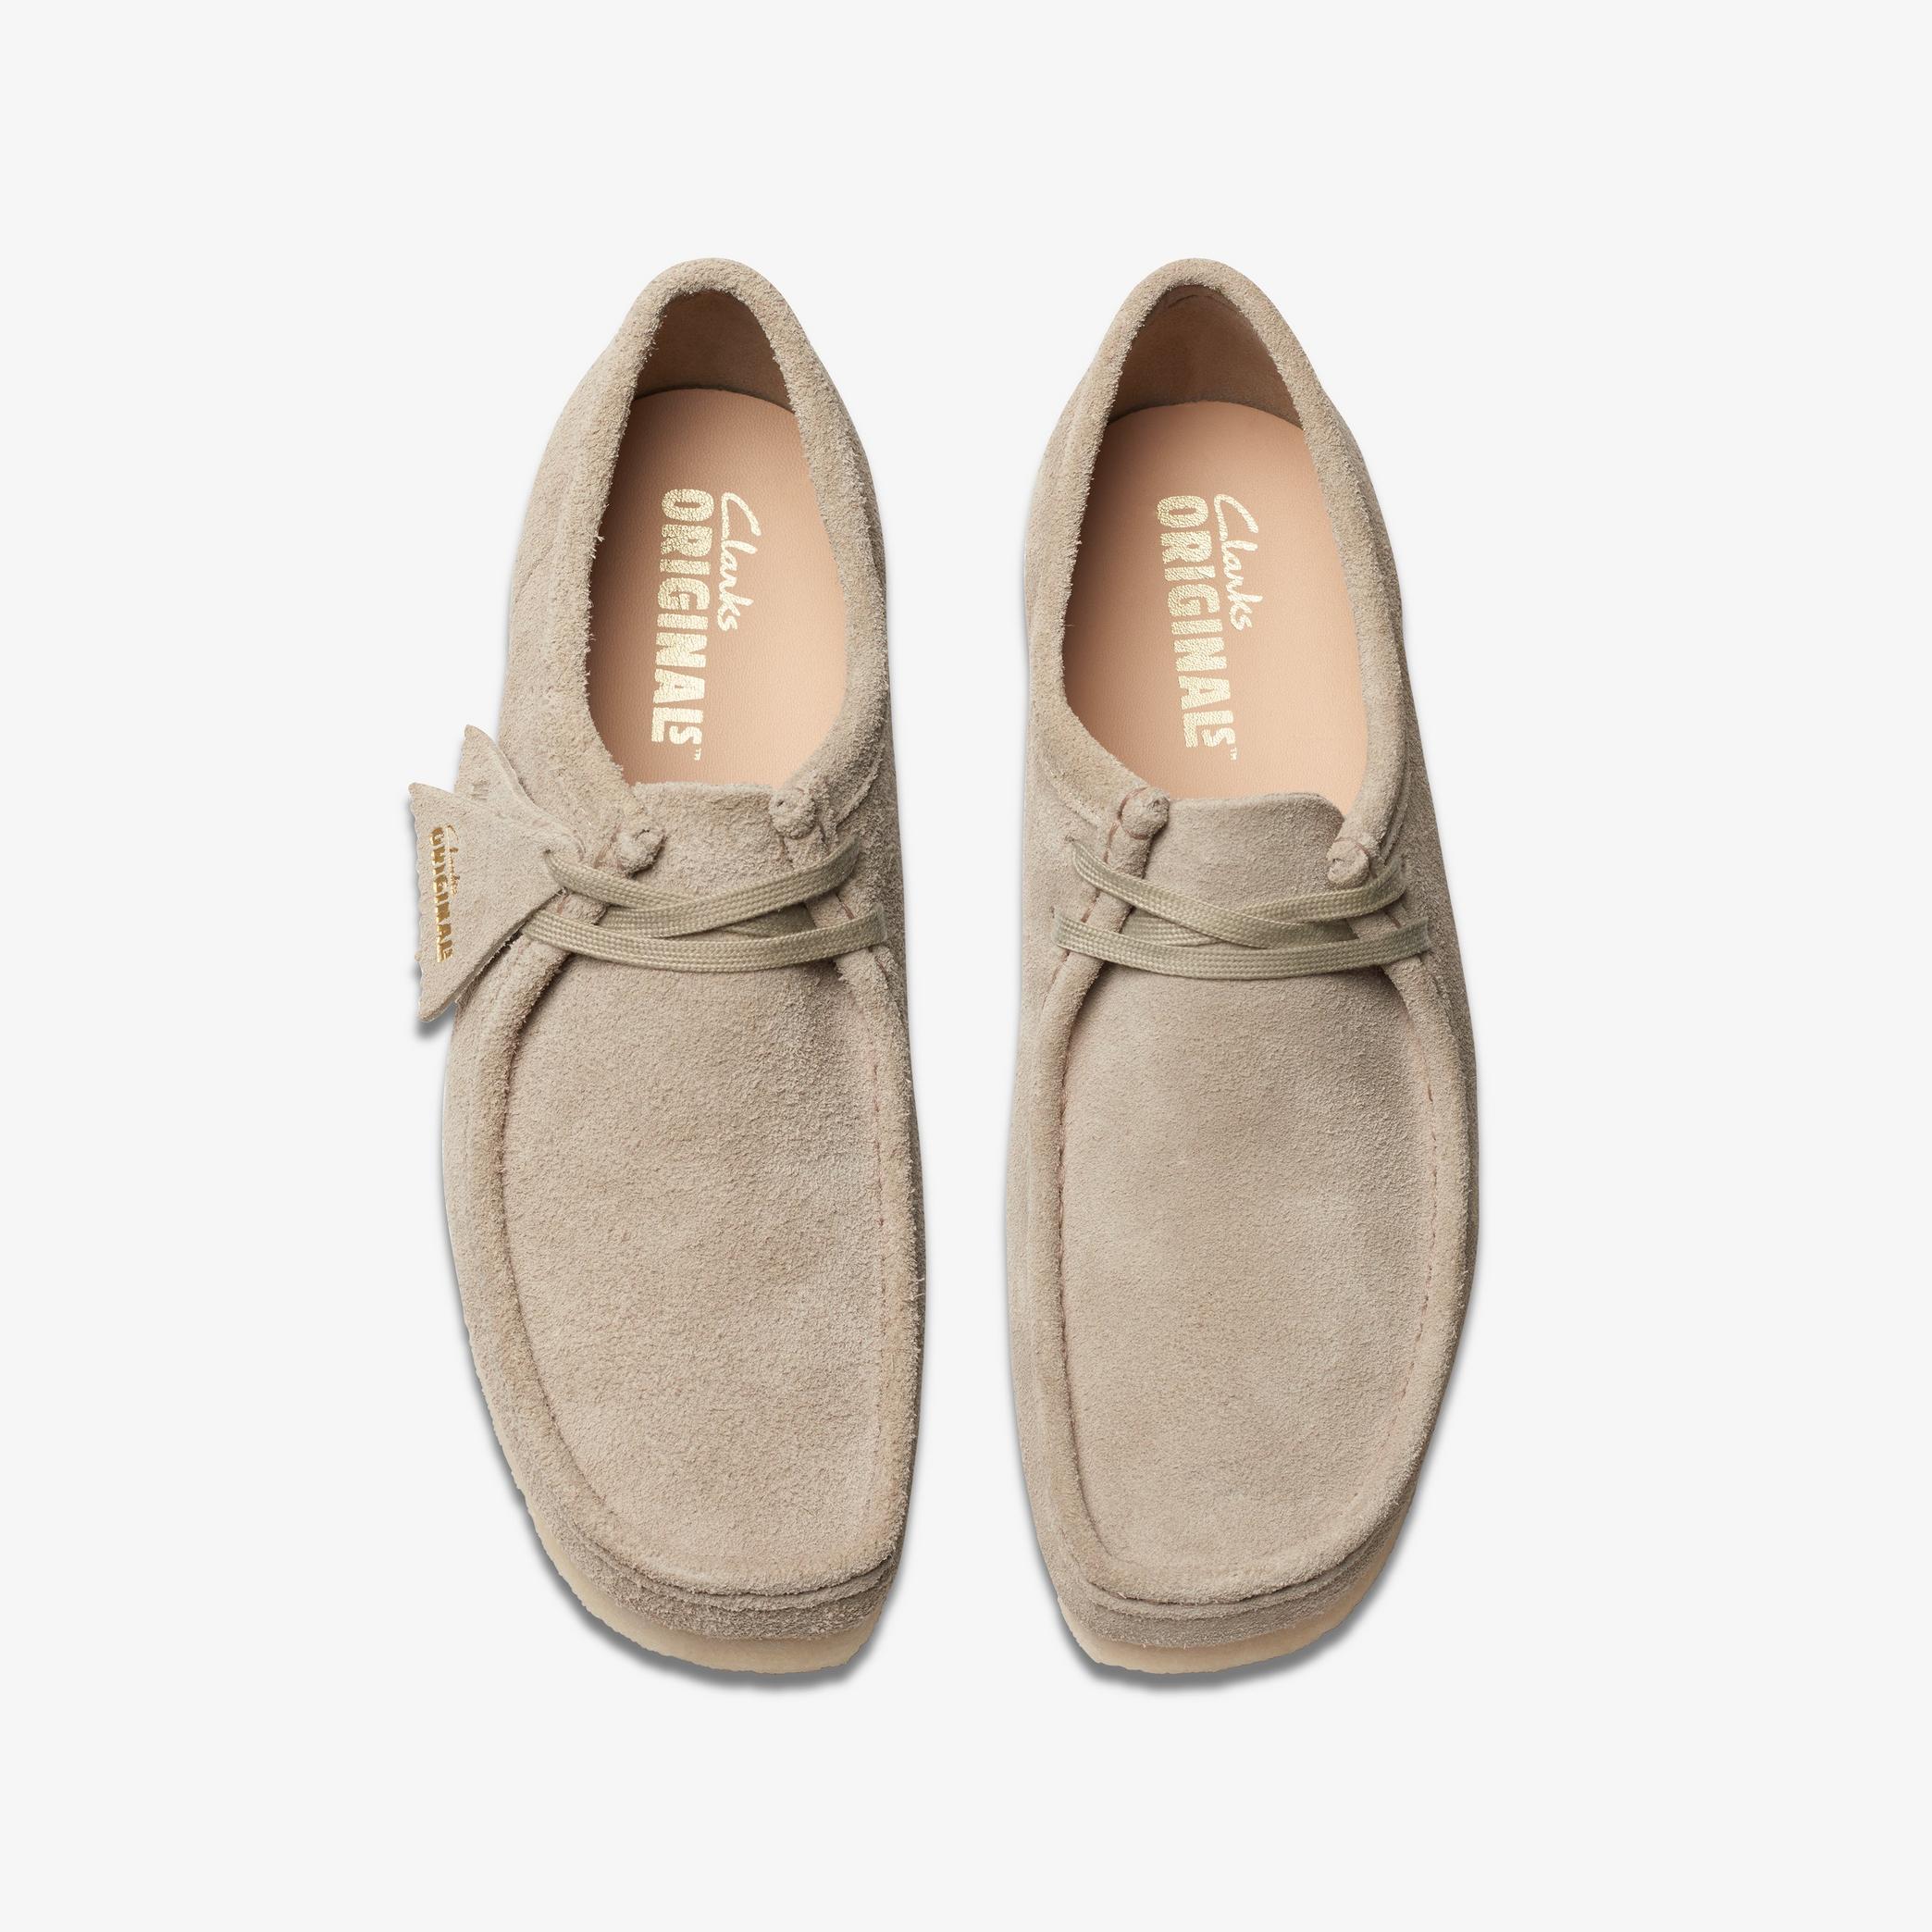 Wallabee Pale Grey Suede Wallabee, view 6 of 7